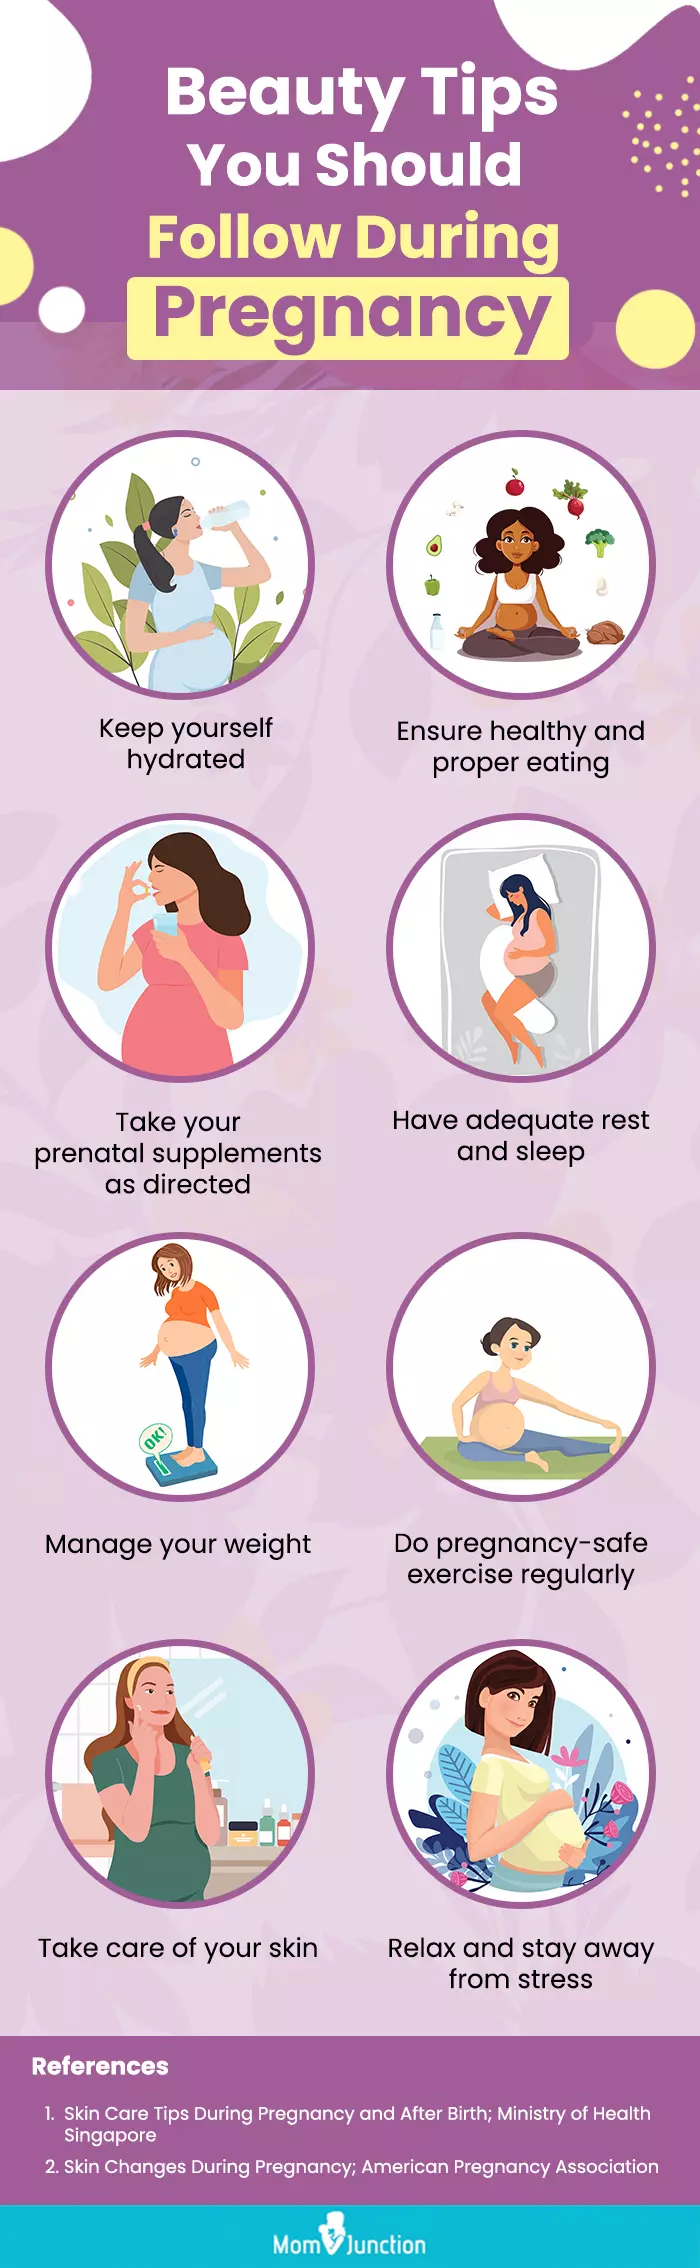 beauty tips you should follow during pregnancy (infographic) 